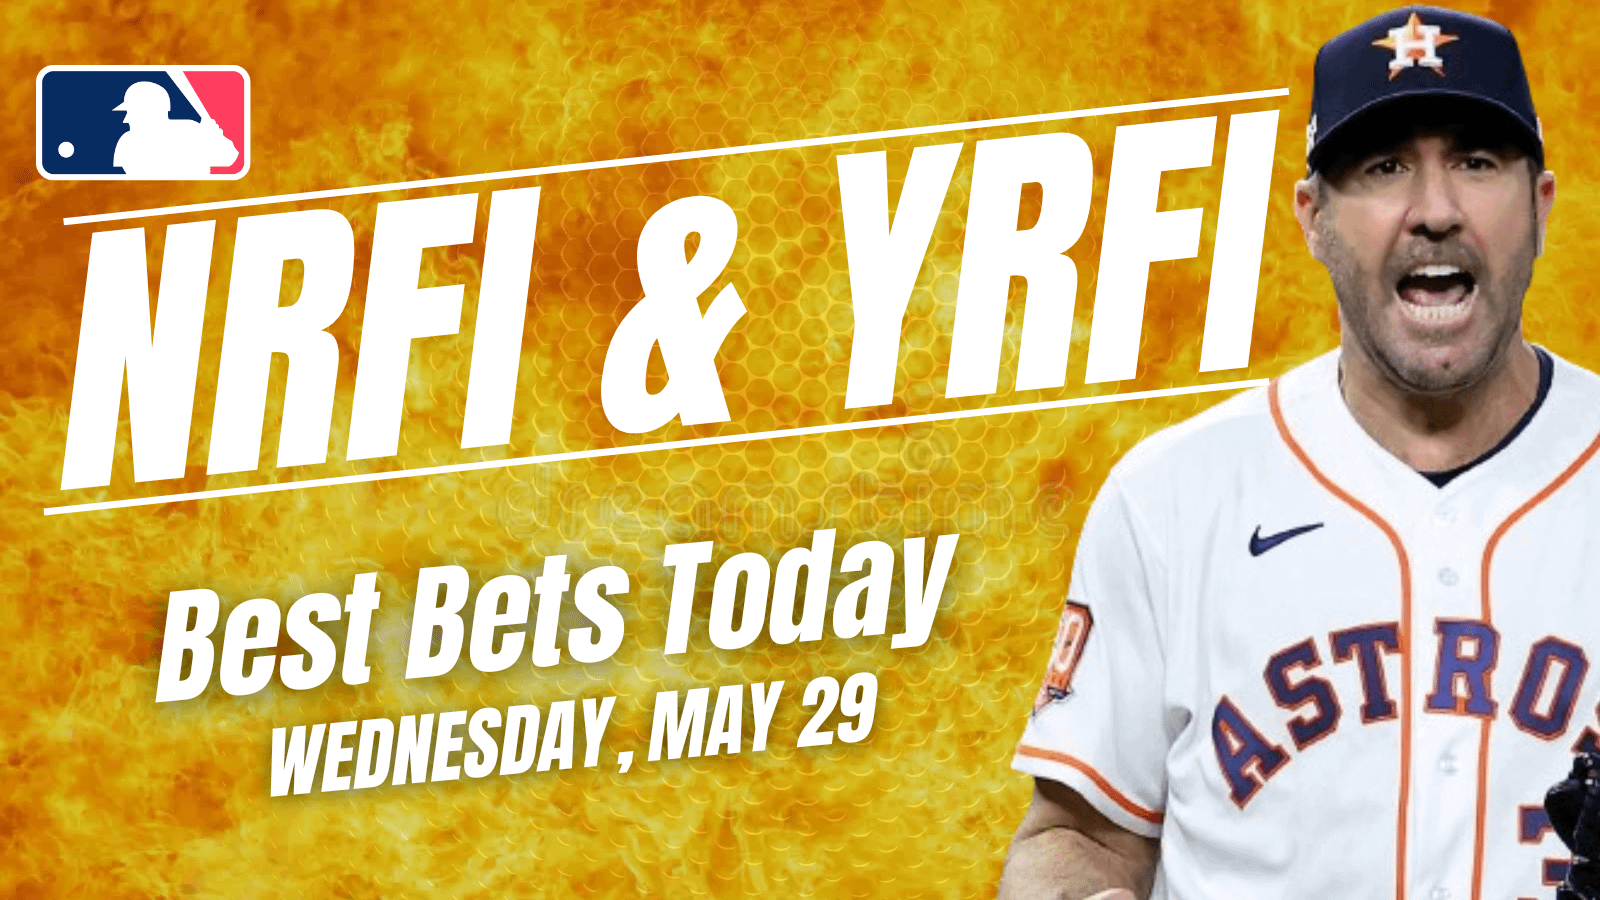 Looking for the top YRFI & NRFI bets today? We dive into the best no first inning bets for Wednesday, May 29, including...